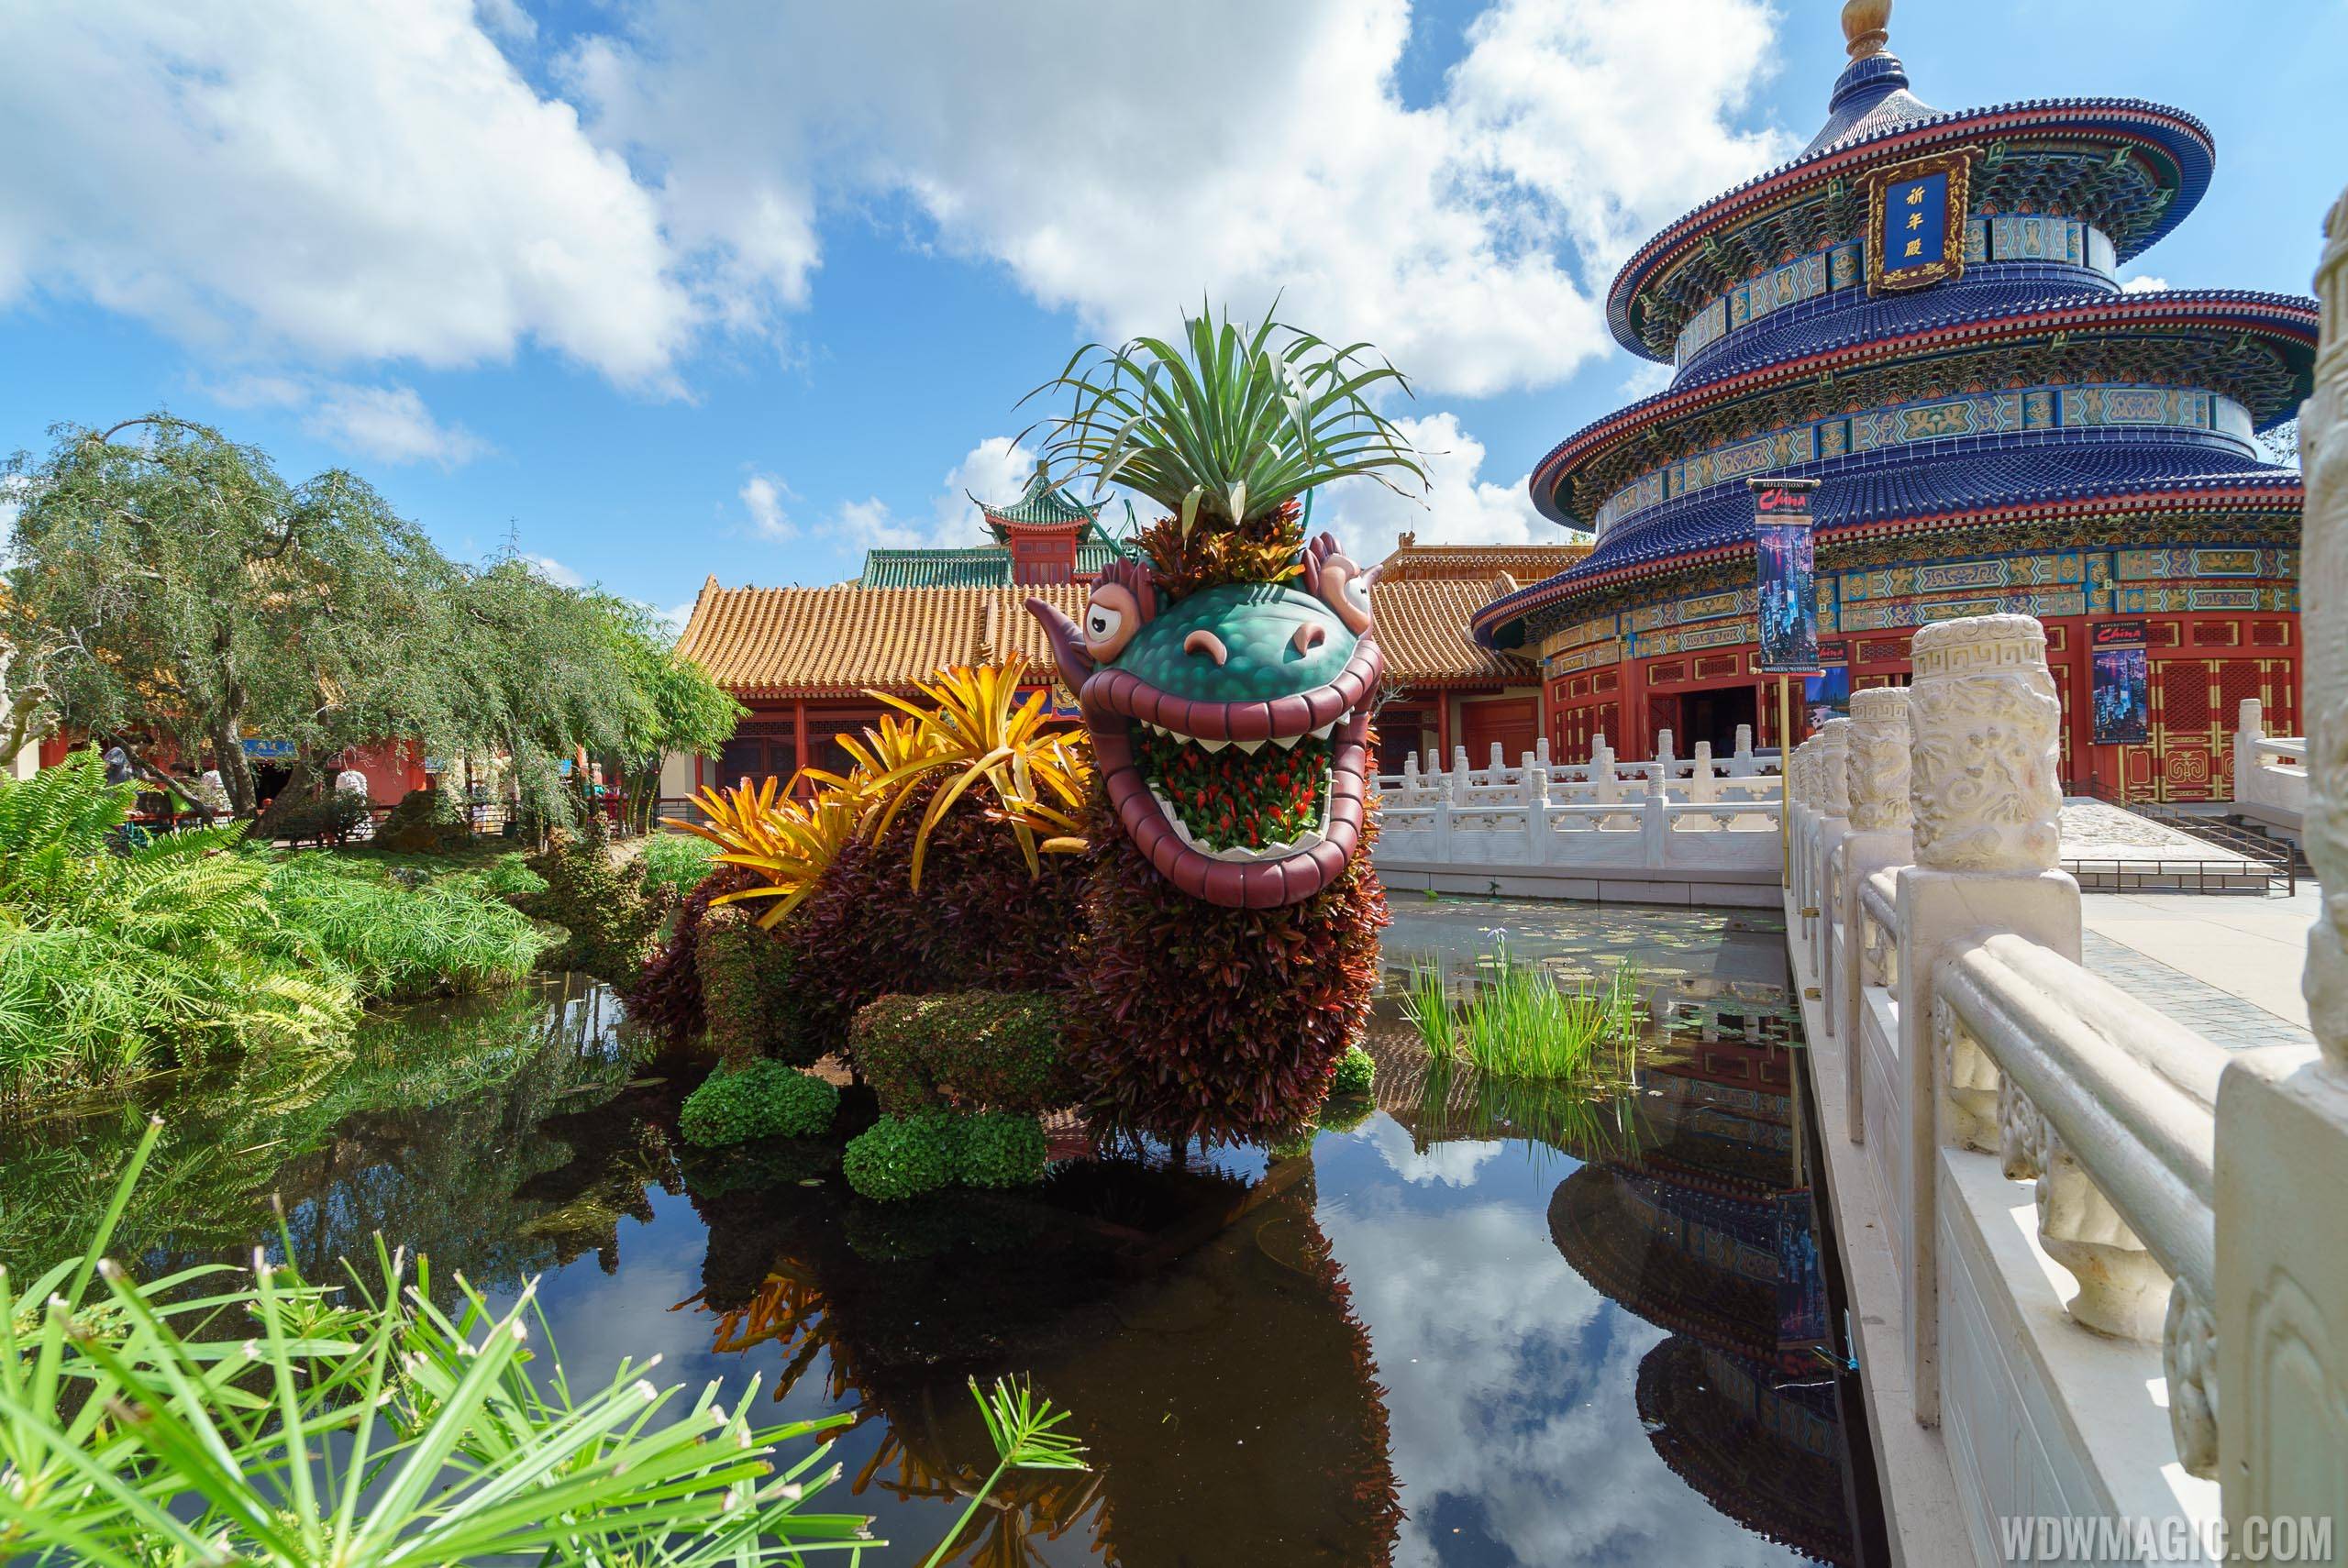 2017 Flower and Garden Festival - Bromeliad Dragon at China